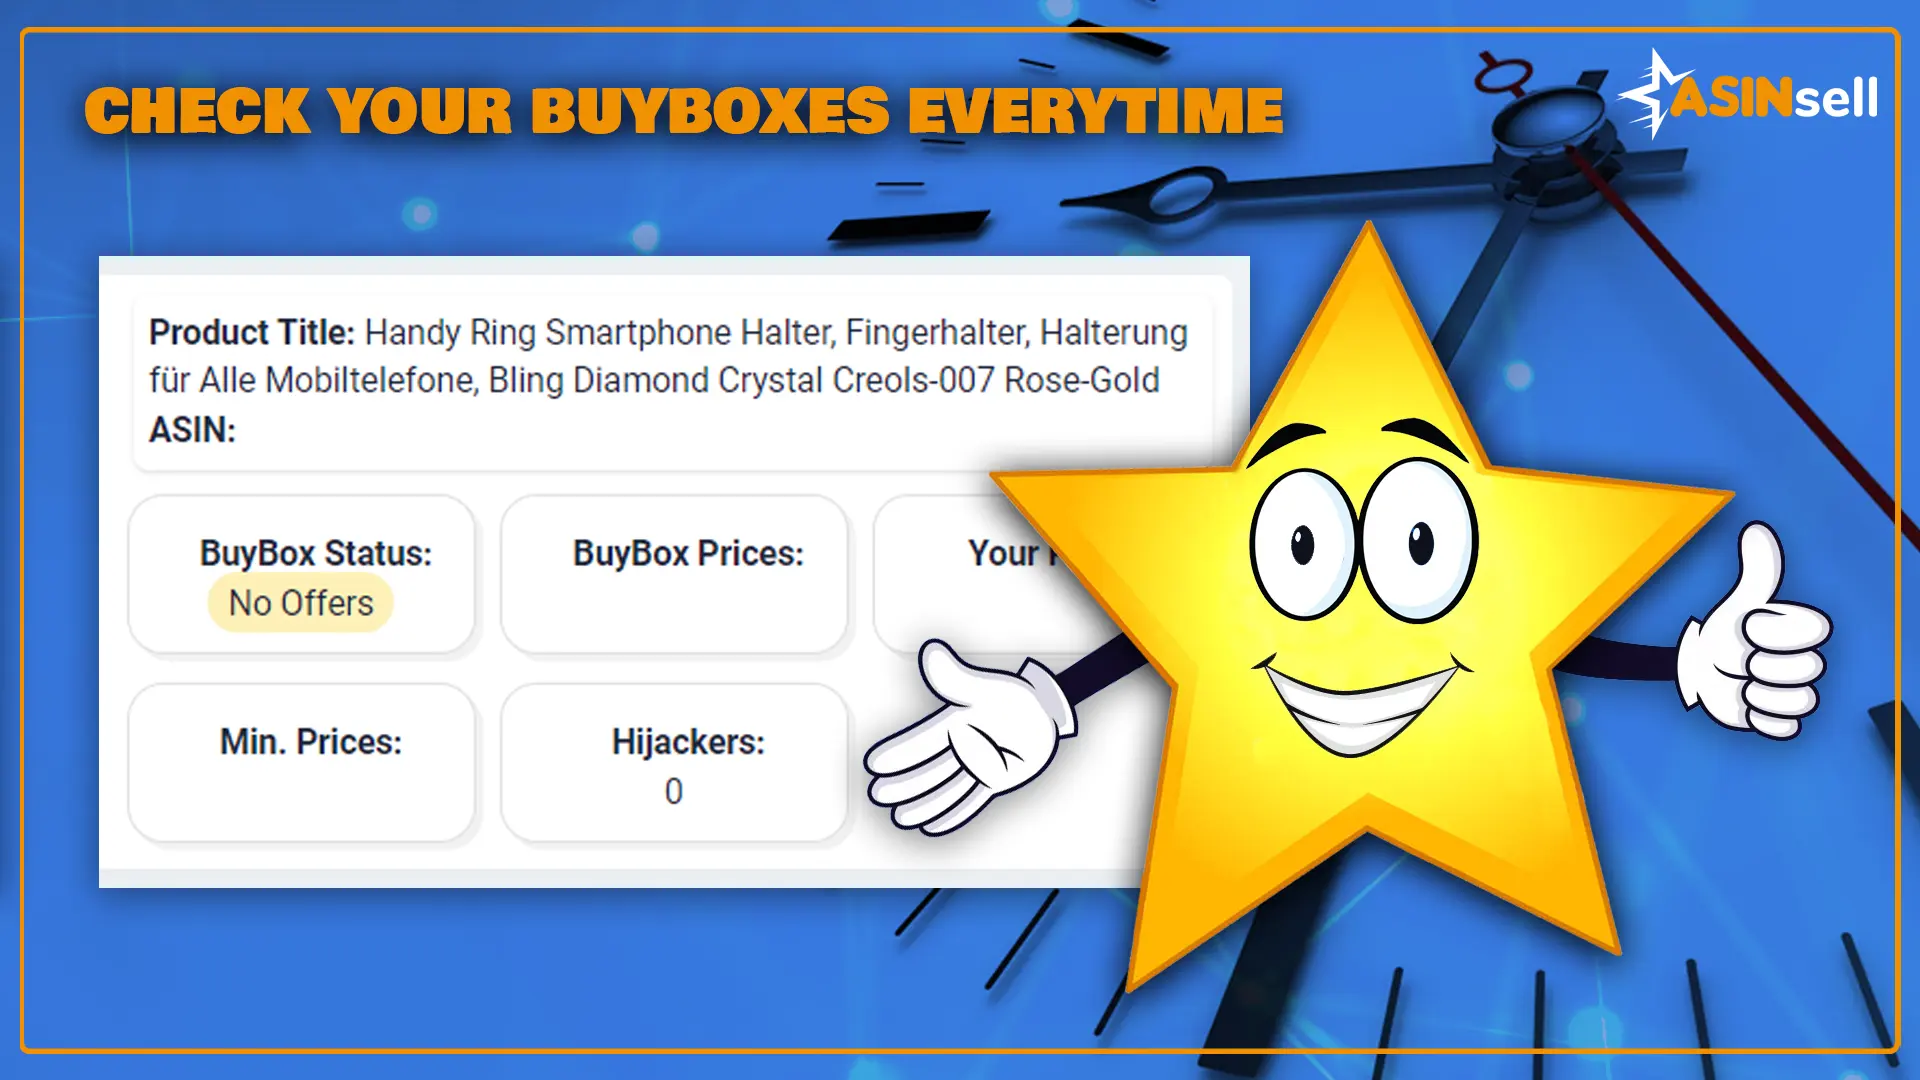 Check Your BuyBox Status  Every Time